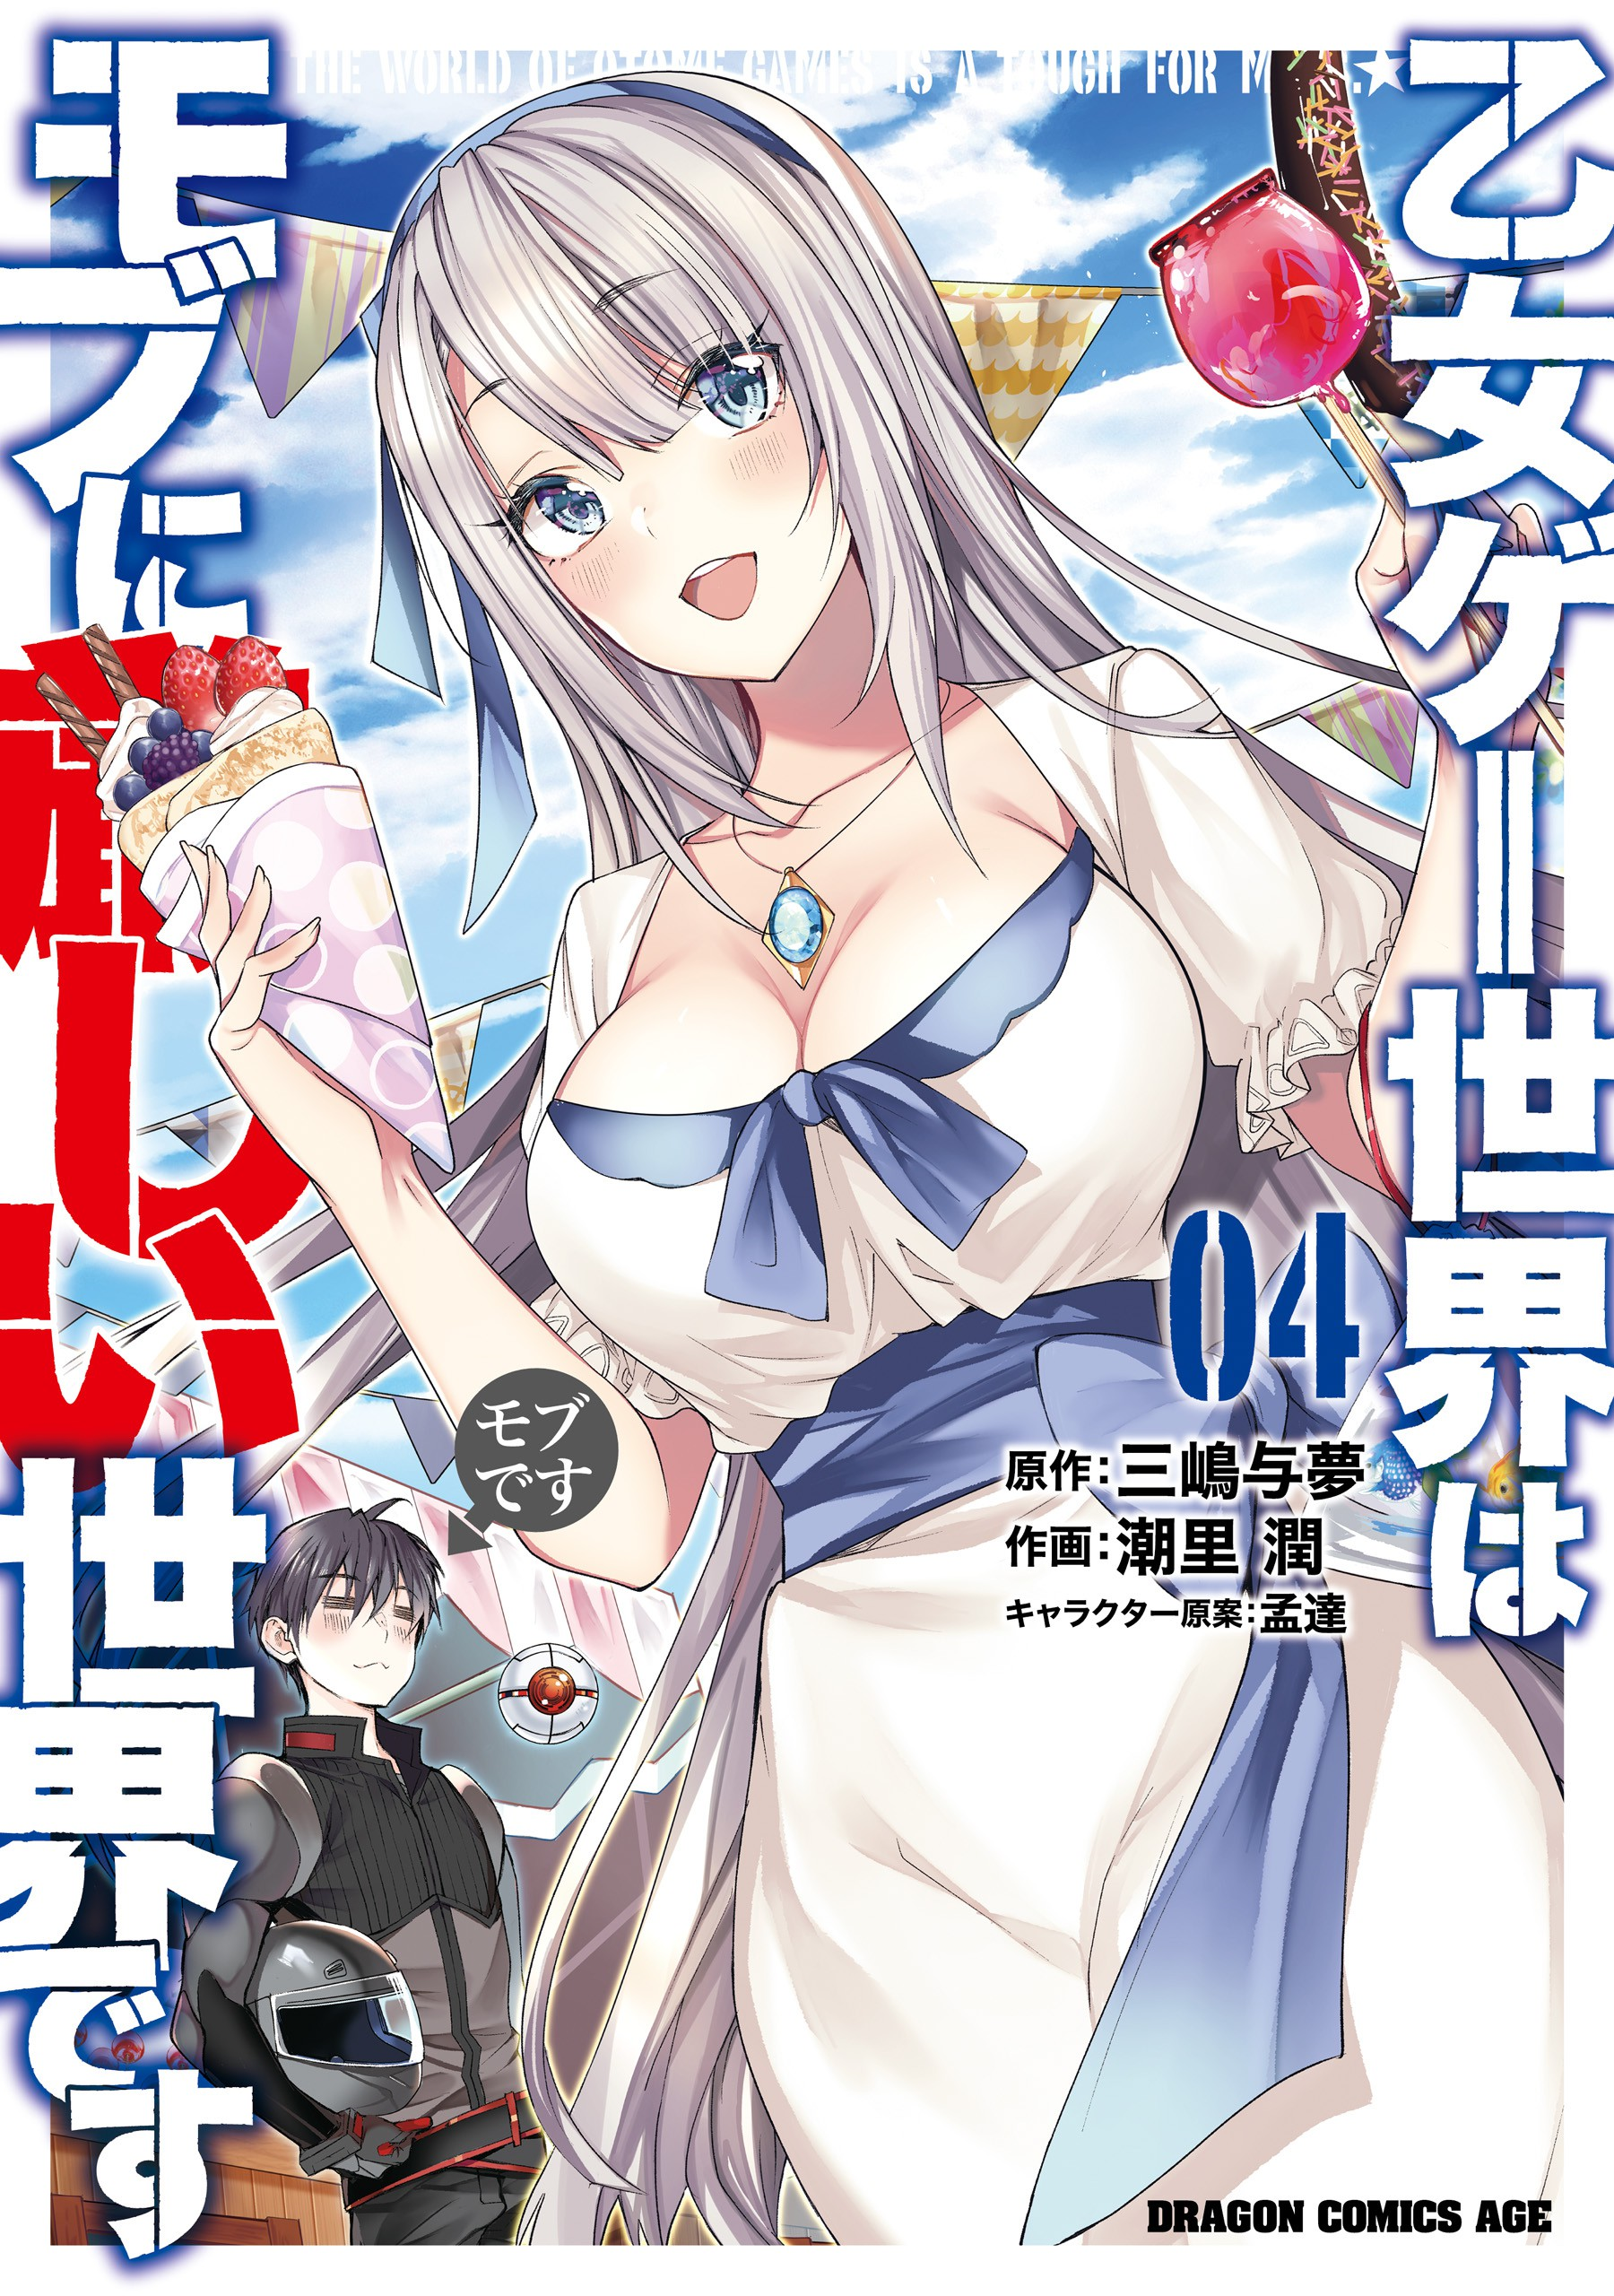 Read The World Of Otome Games Is Tough For Mobs 41 - Oni Scan